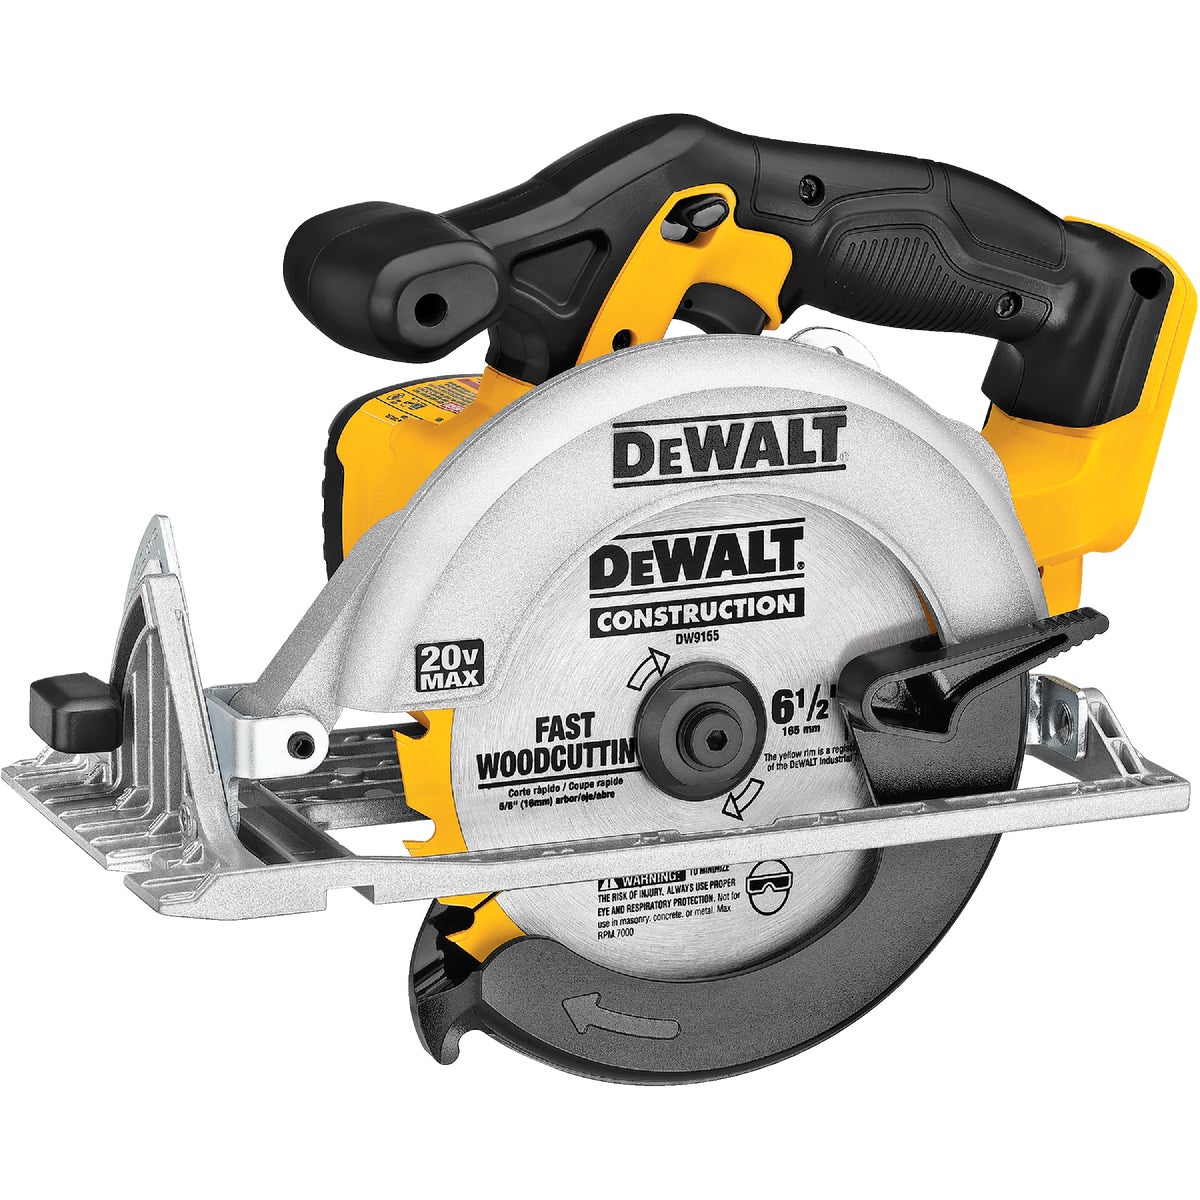 DEWALT 20 Volt MAX Lithium-Ion 6-1/2 In. Cordless Circular Saw (Tool Only)